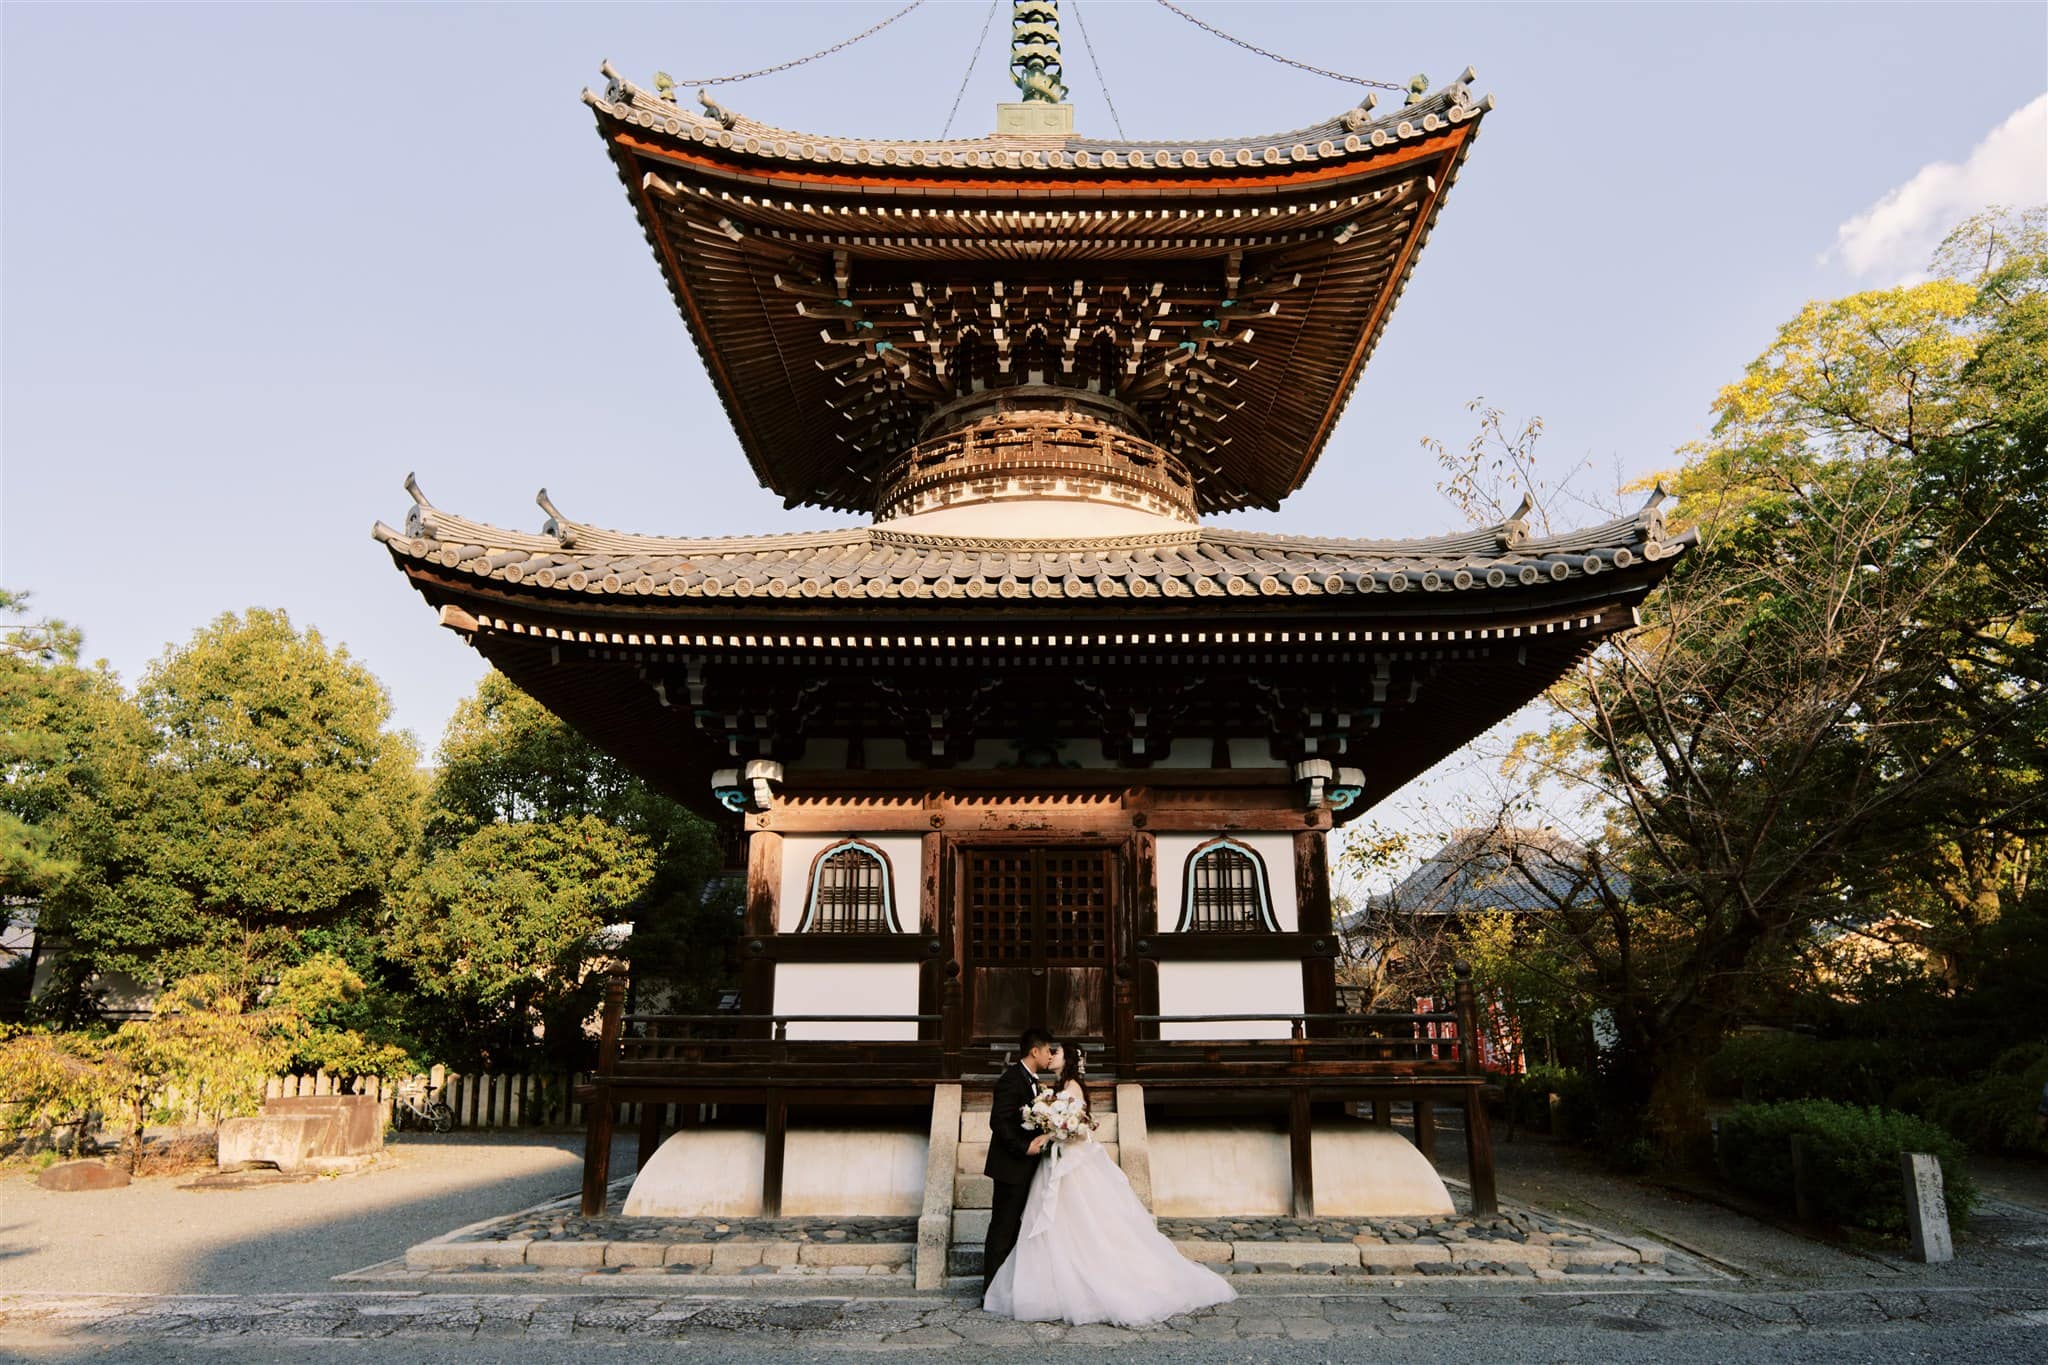 Kyoto Tokyo Japan Elopement Wedding Photographer, Planner & Videographer | A Japan elopement photographer captures a bride and groom posing in front of a pagoda.